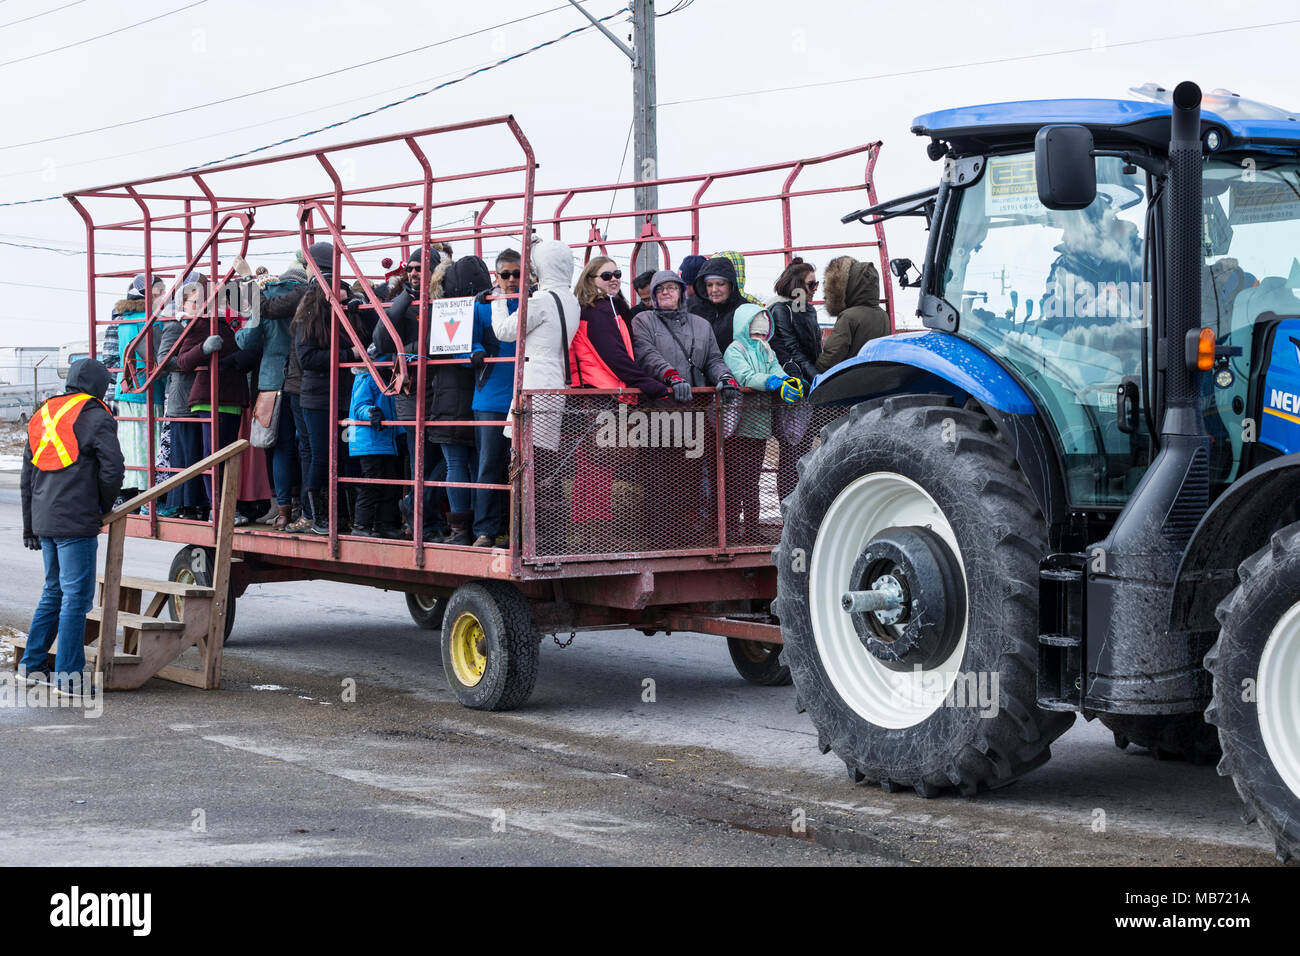 Elmira, Ontario Canada. 07 April 2018. Elmira Maple Syrup Festival 2018, World's largest single day syrup festival. Shuttle service from parking lot to festival area. Performance Image/Alamy Live News Stock Photo